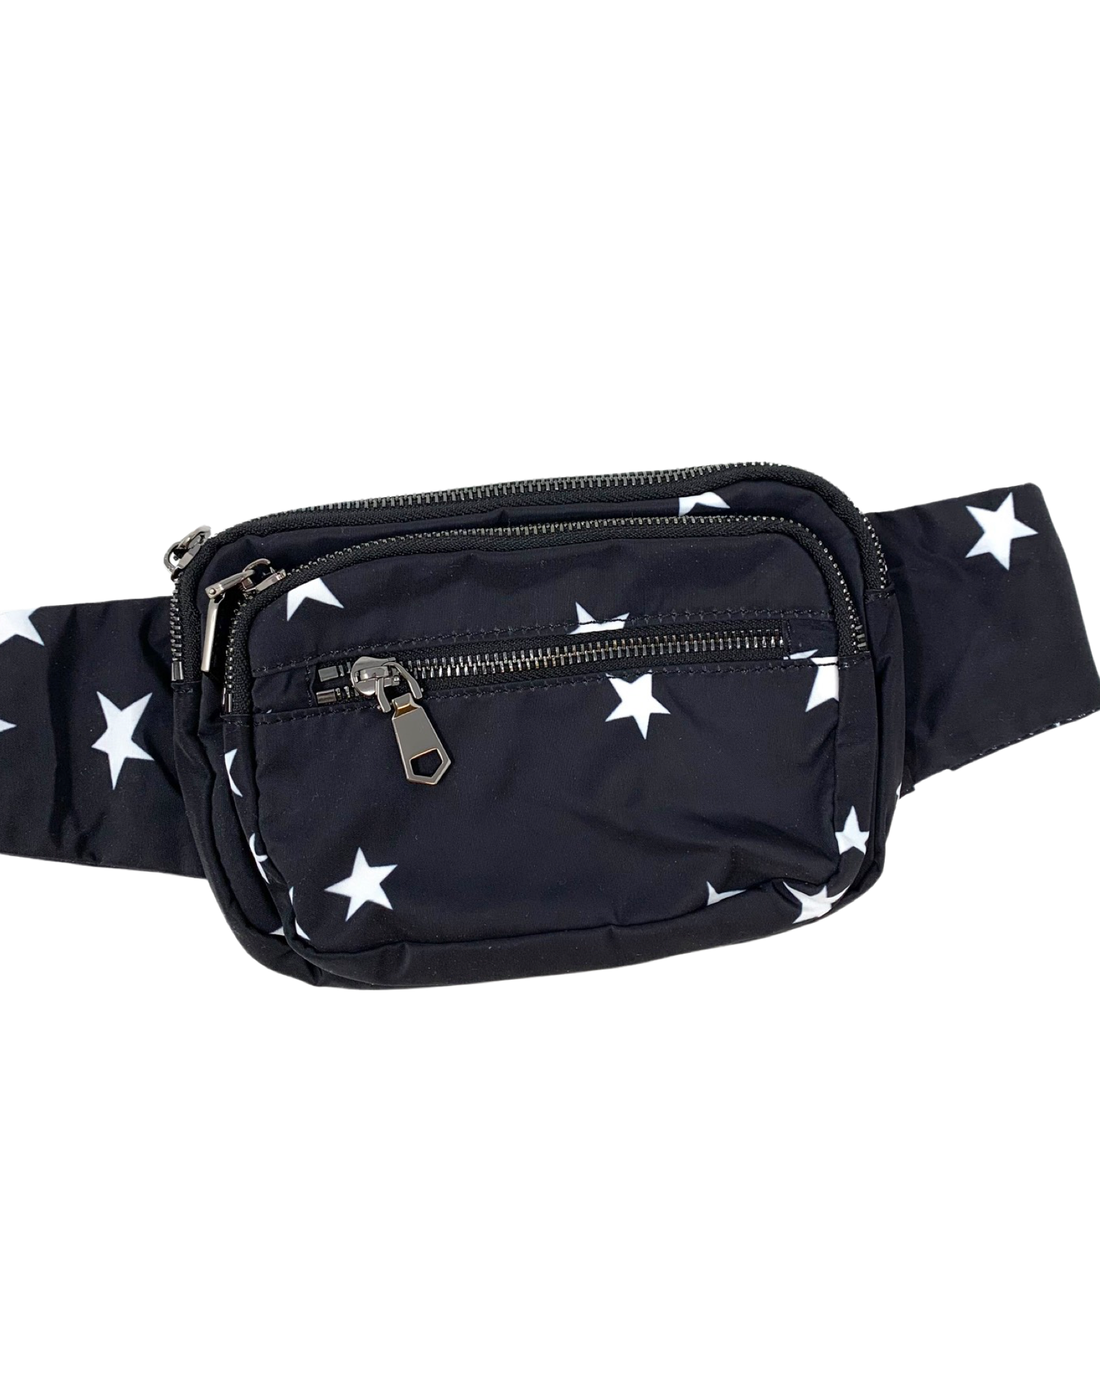 Hip Hugger Fanny Pack in Black with Stars